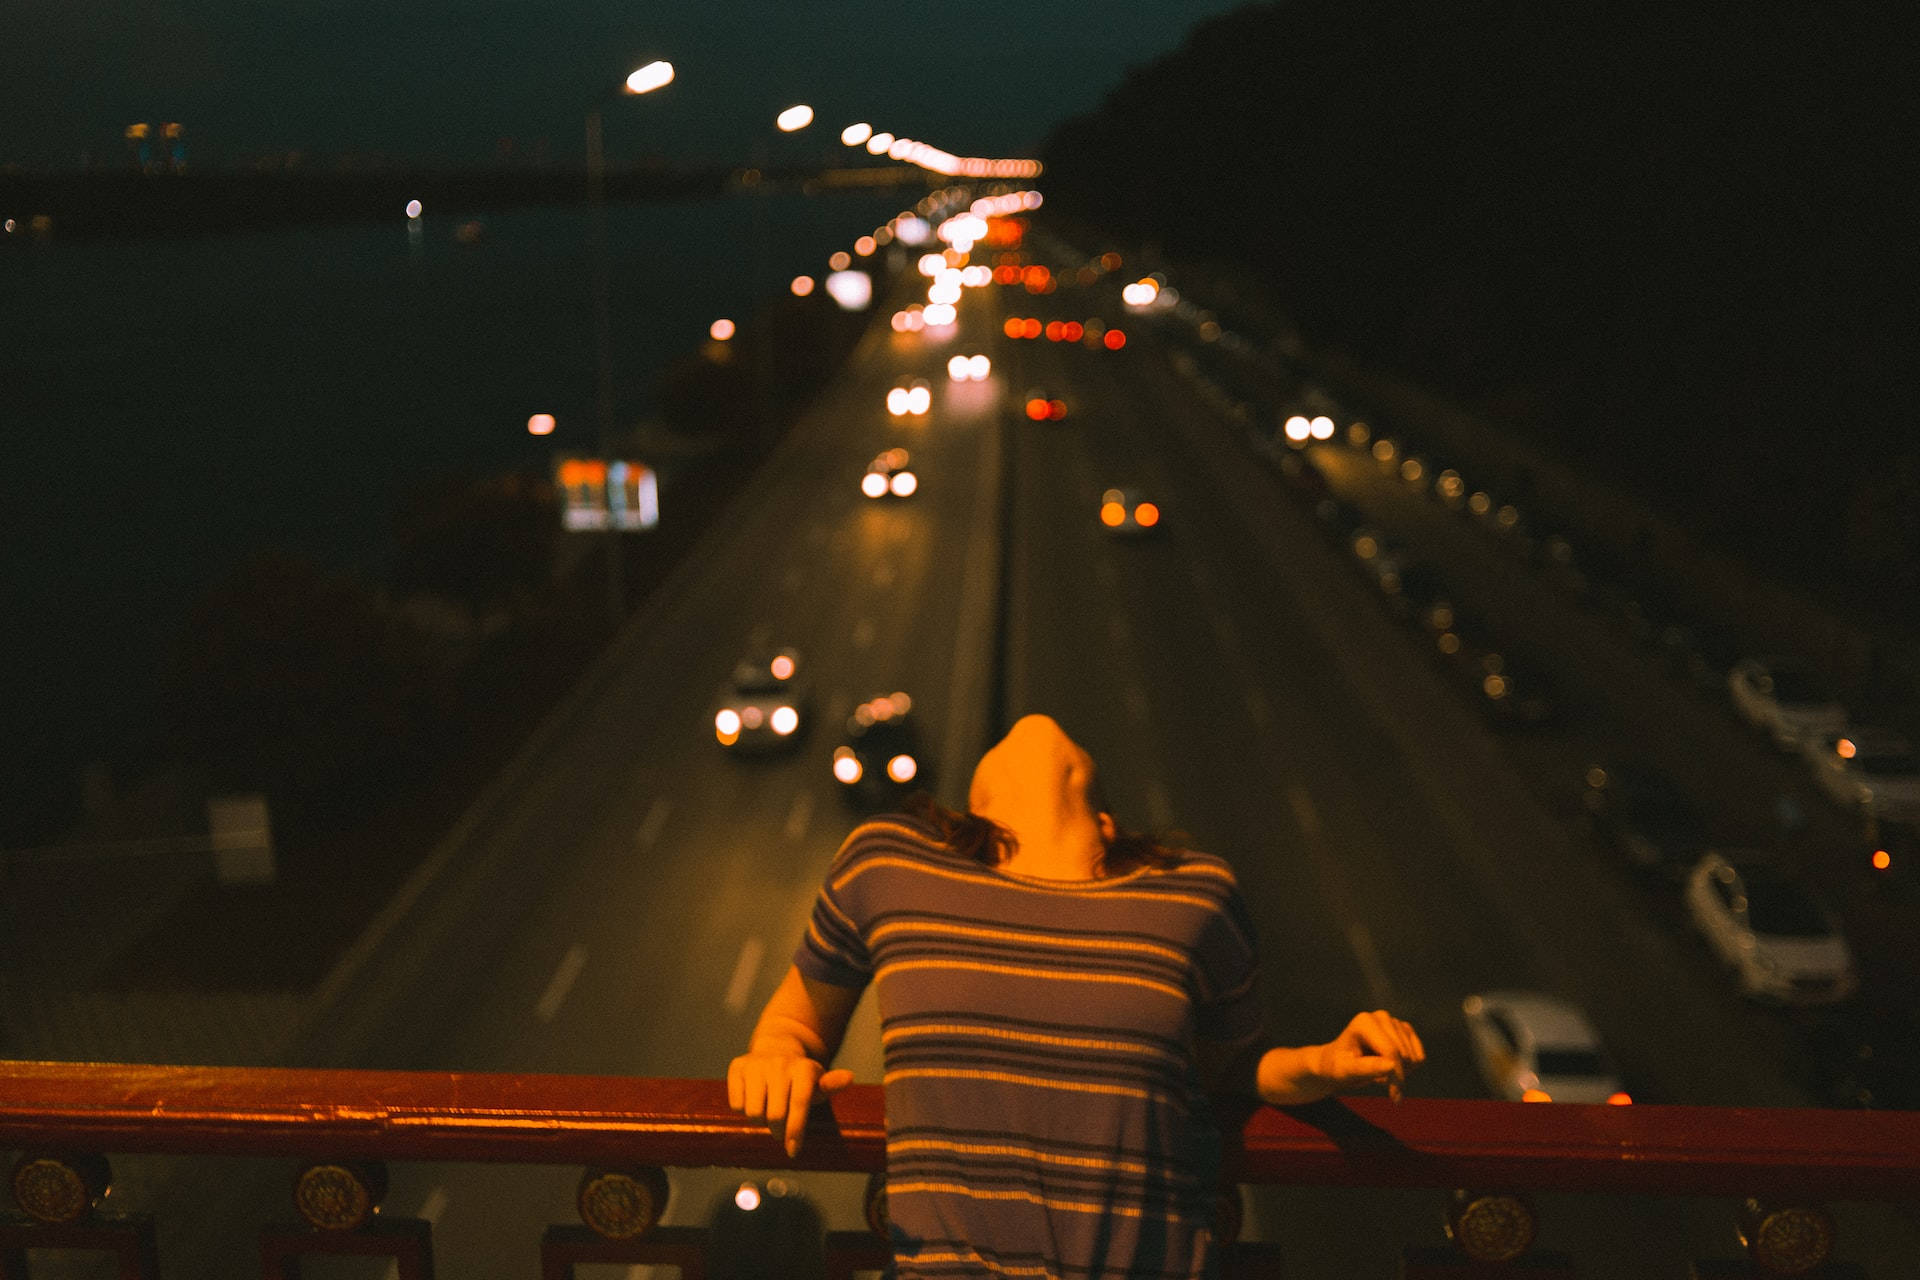 Night Aesthetic Woman Against Highway Background